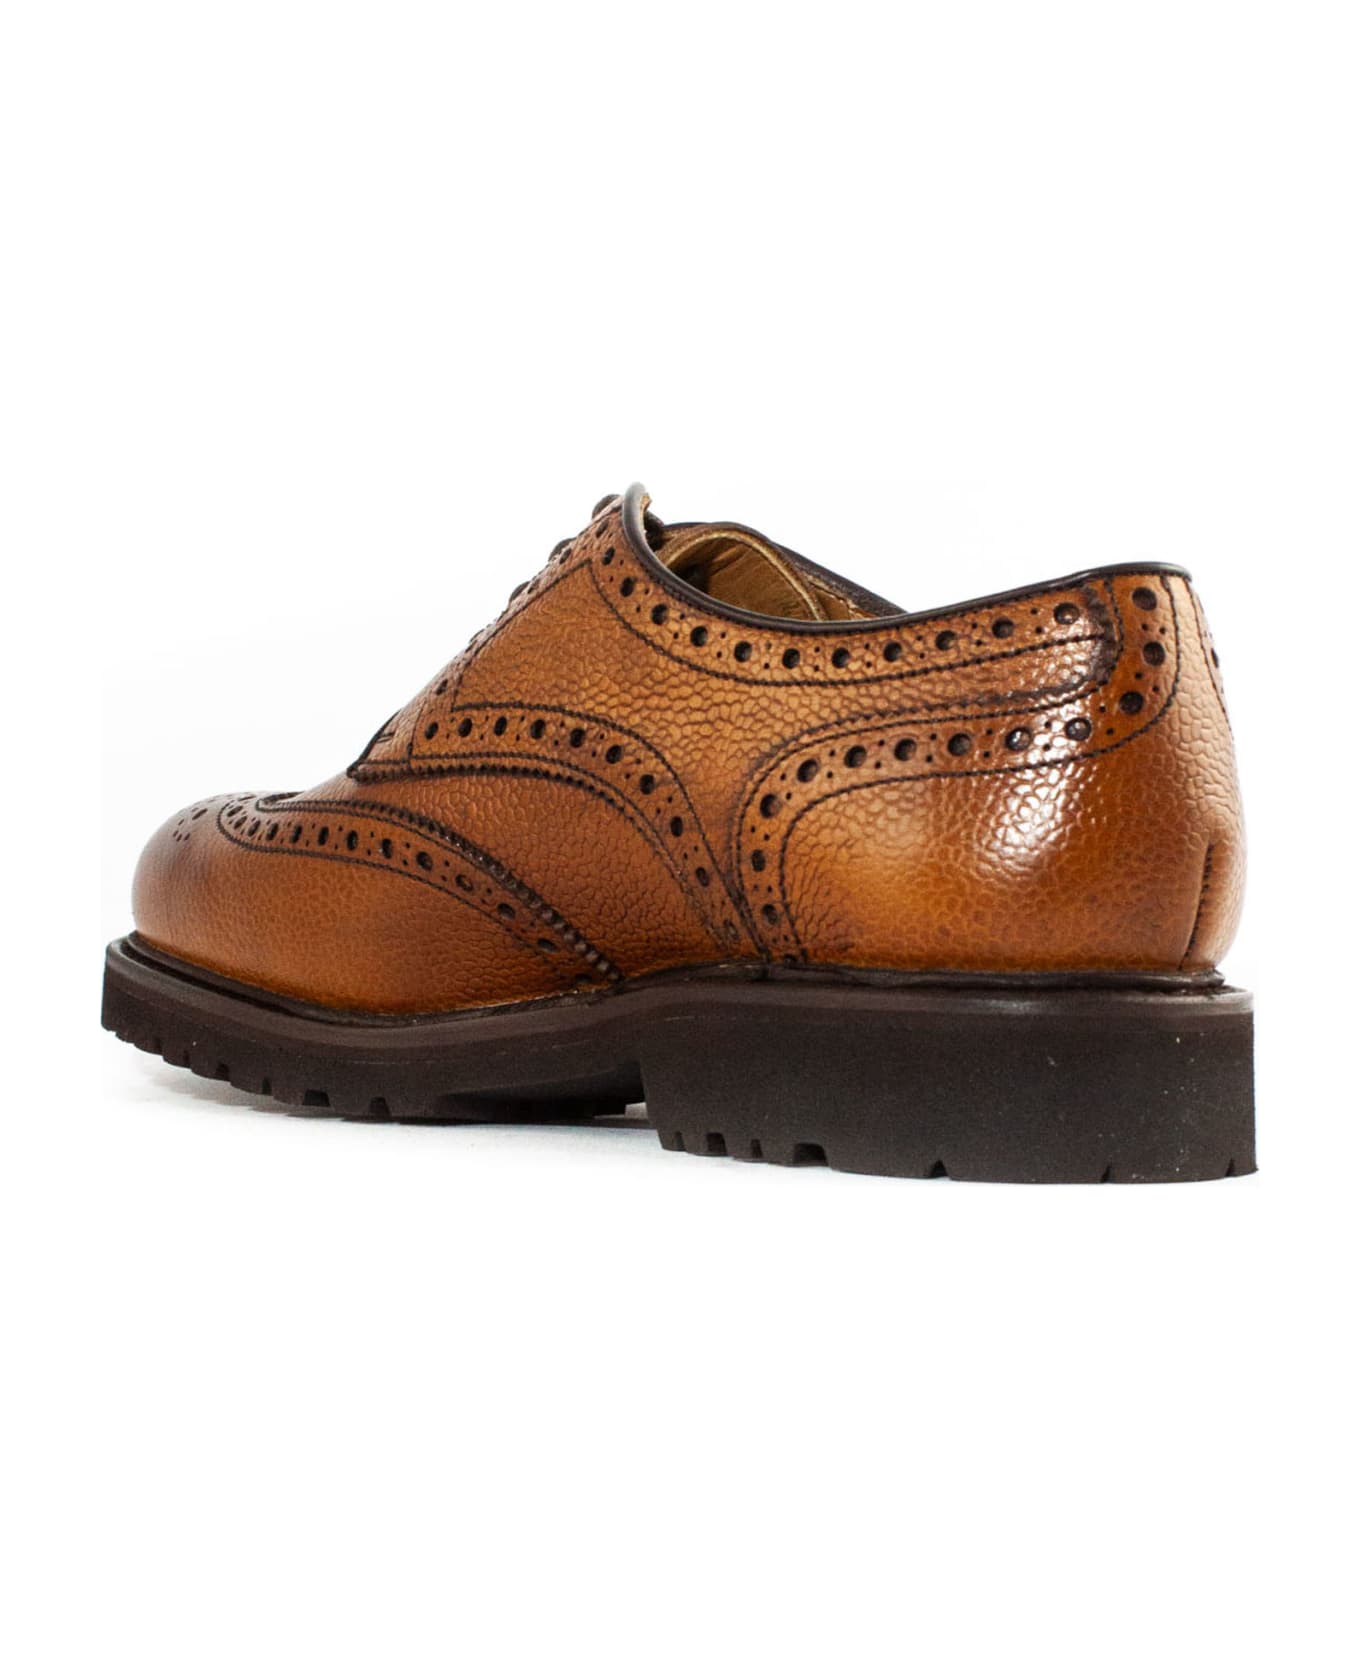 Berwick 1707 Brown Leather Derby Shoes - Marrone